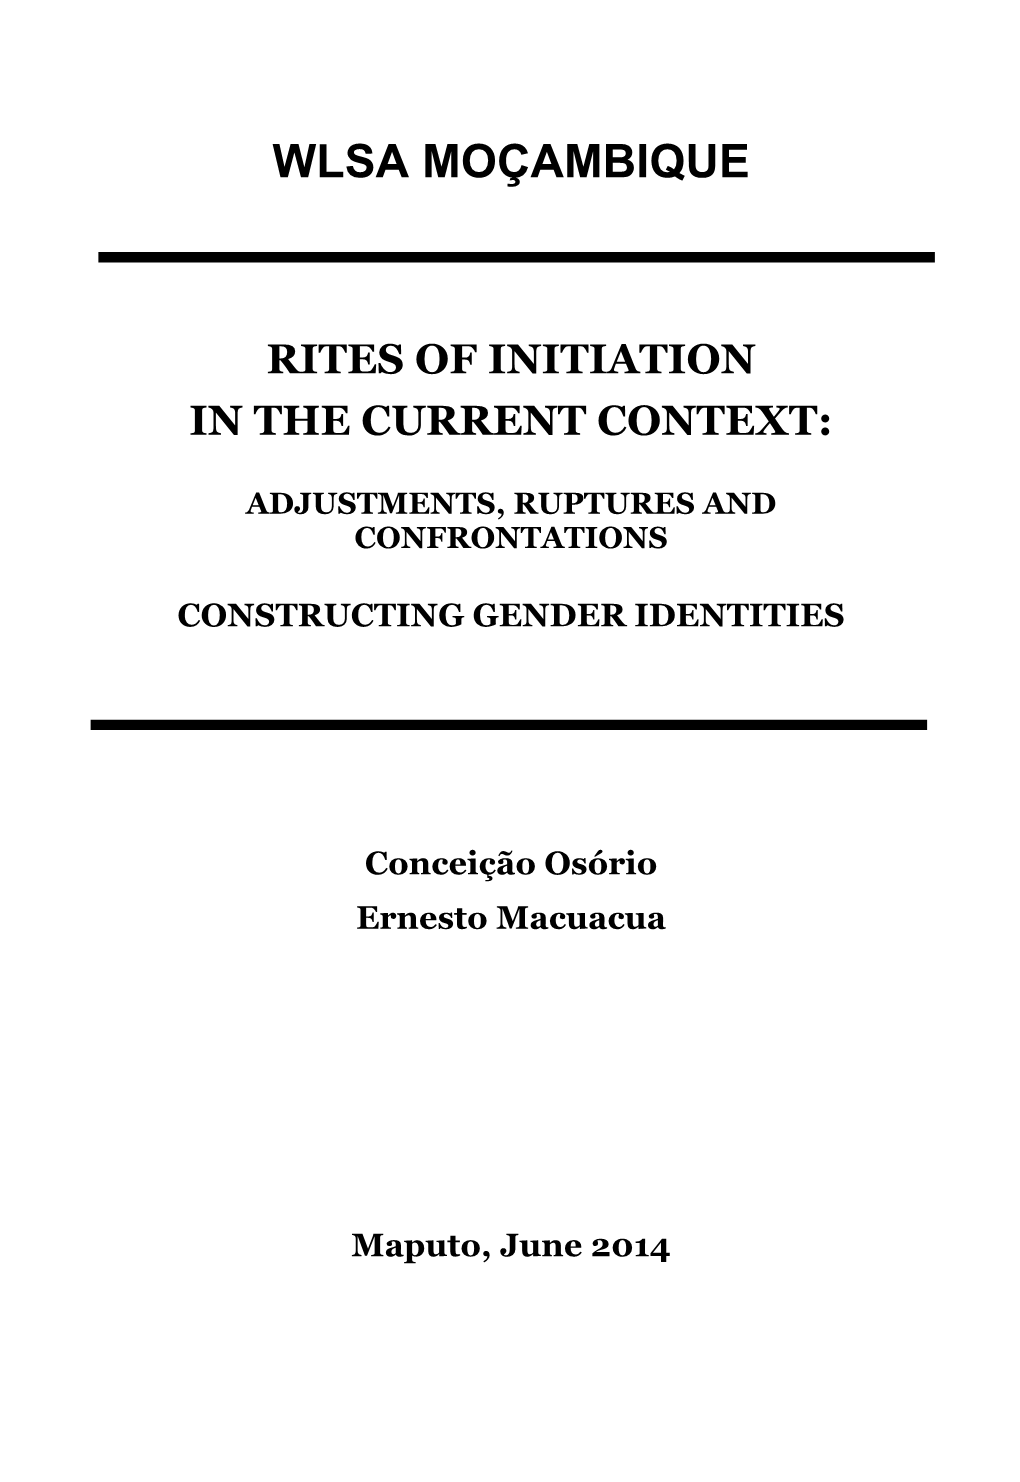 Rites of Initiation in the Current Context